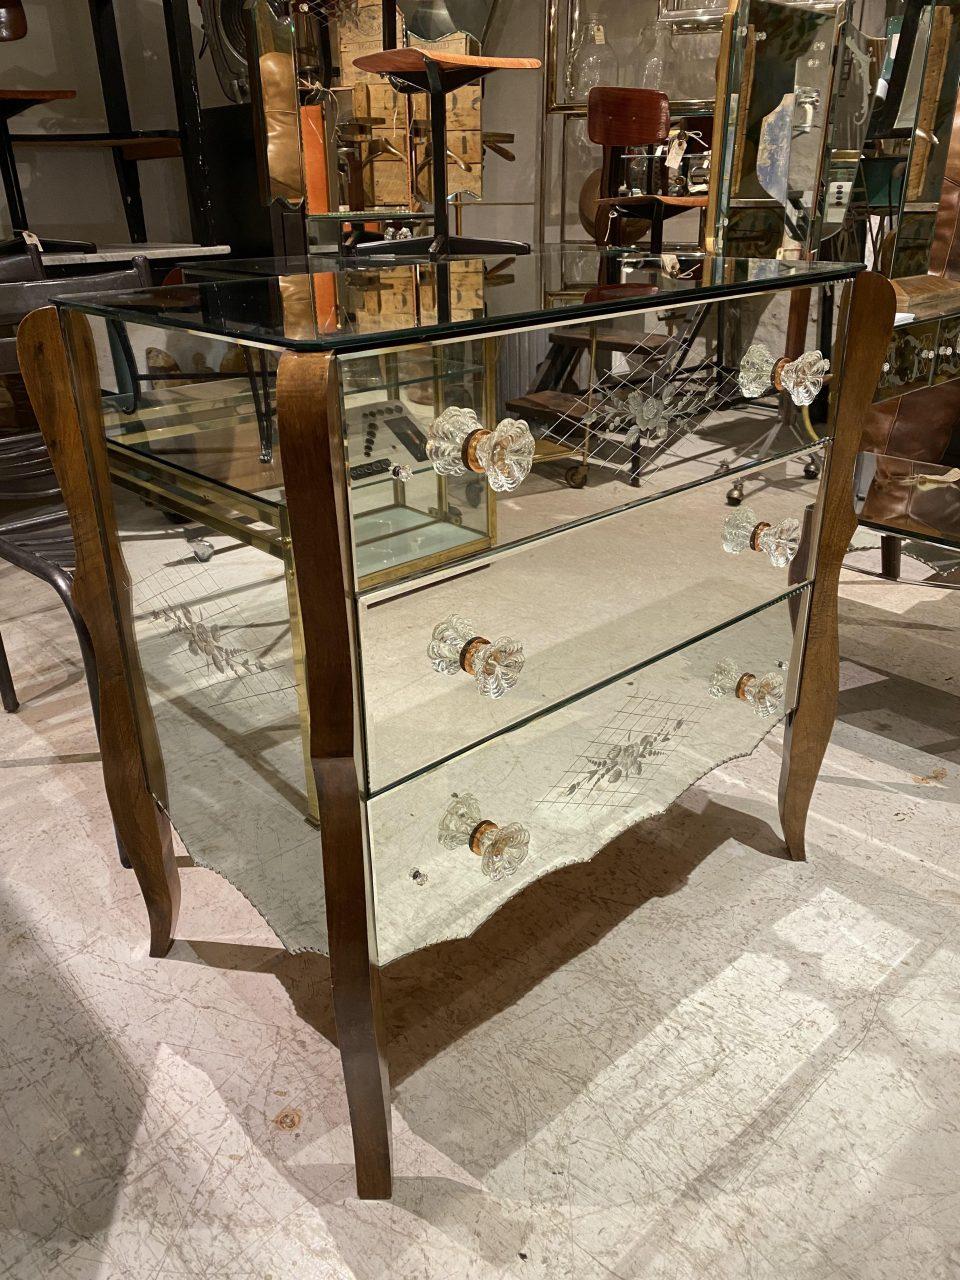 A gorgeous and rare Venetian-style mirrored dresser from 1940s France. The fronts and top have beautiful vintage facet-cut mirror glass, engraved with charming floral motifs.

Kindly also note the lovely glass handles and elegant dark wood tall